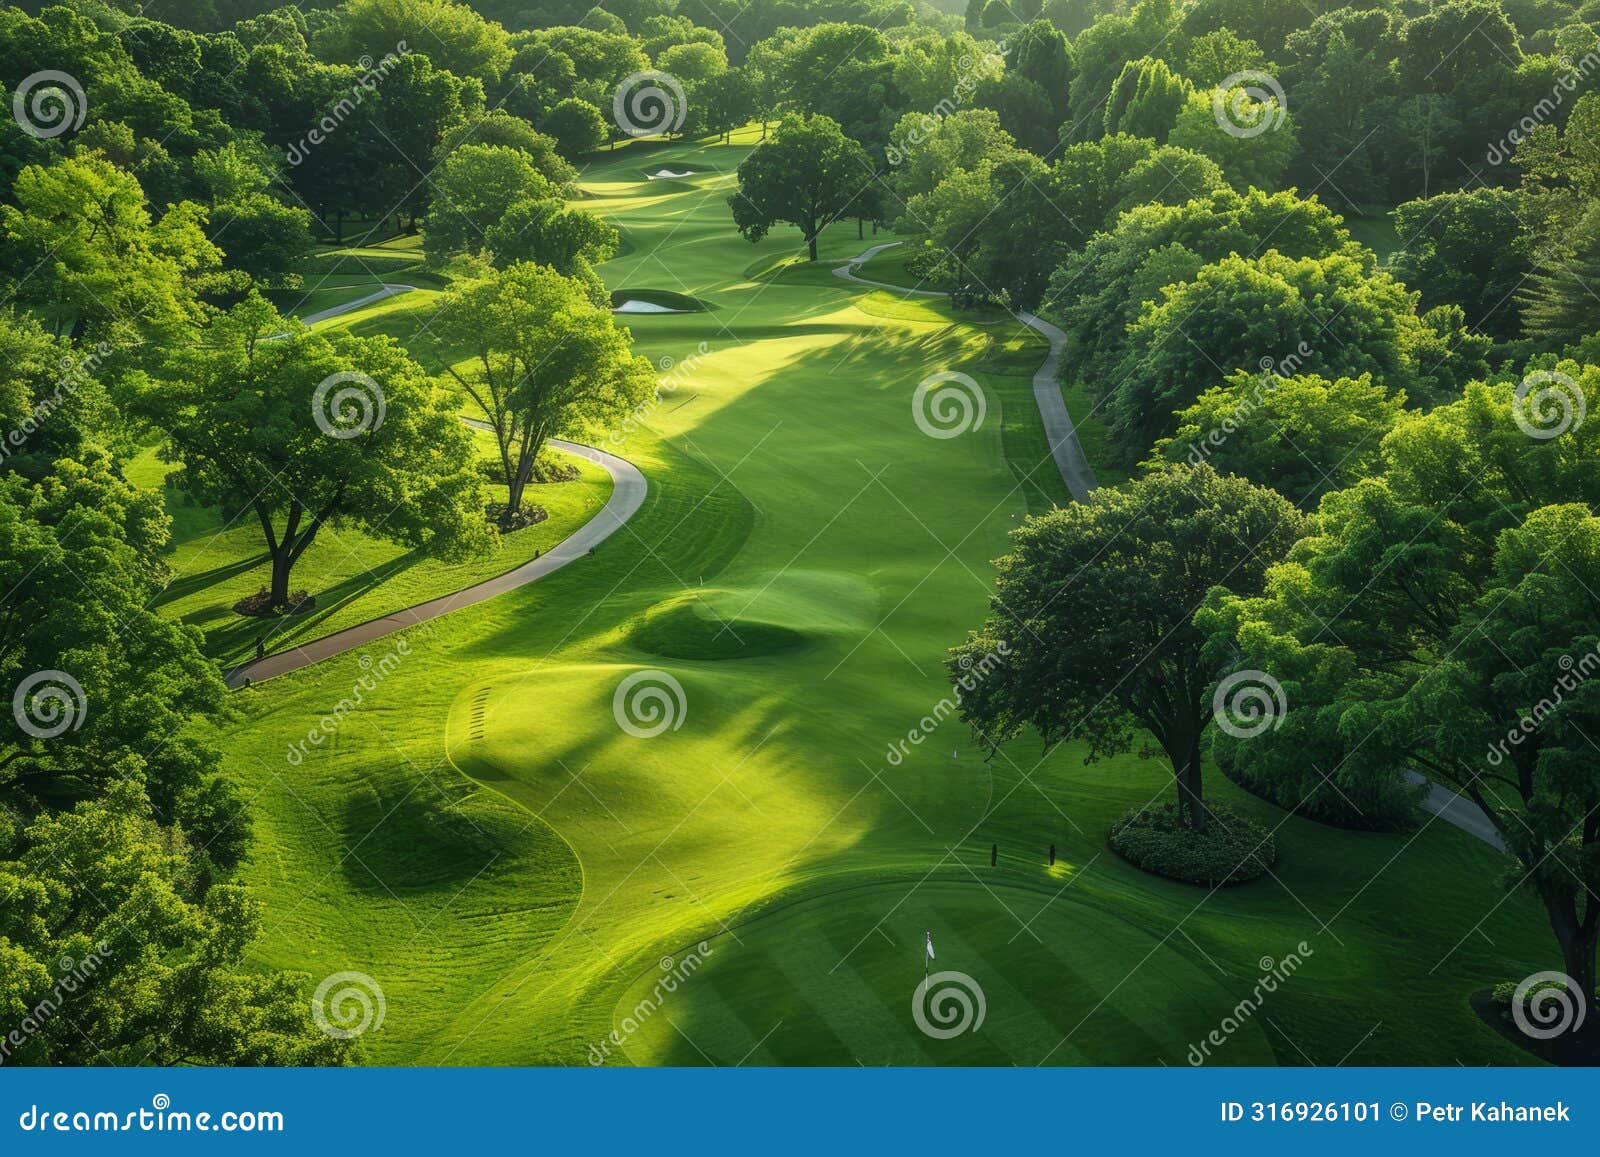 bird's-eye view of an extensive golf course featuring multiple shades of green and perfect landscaping. ai generated